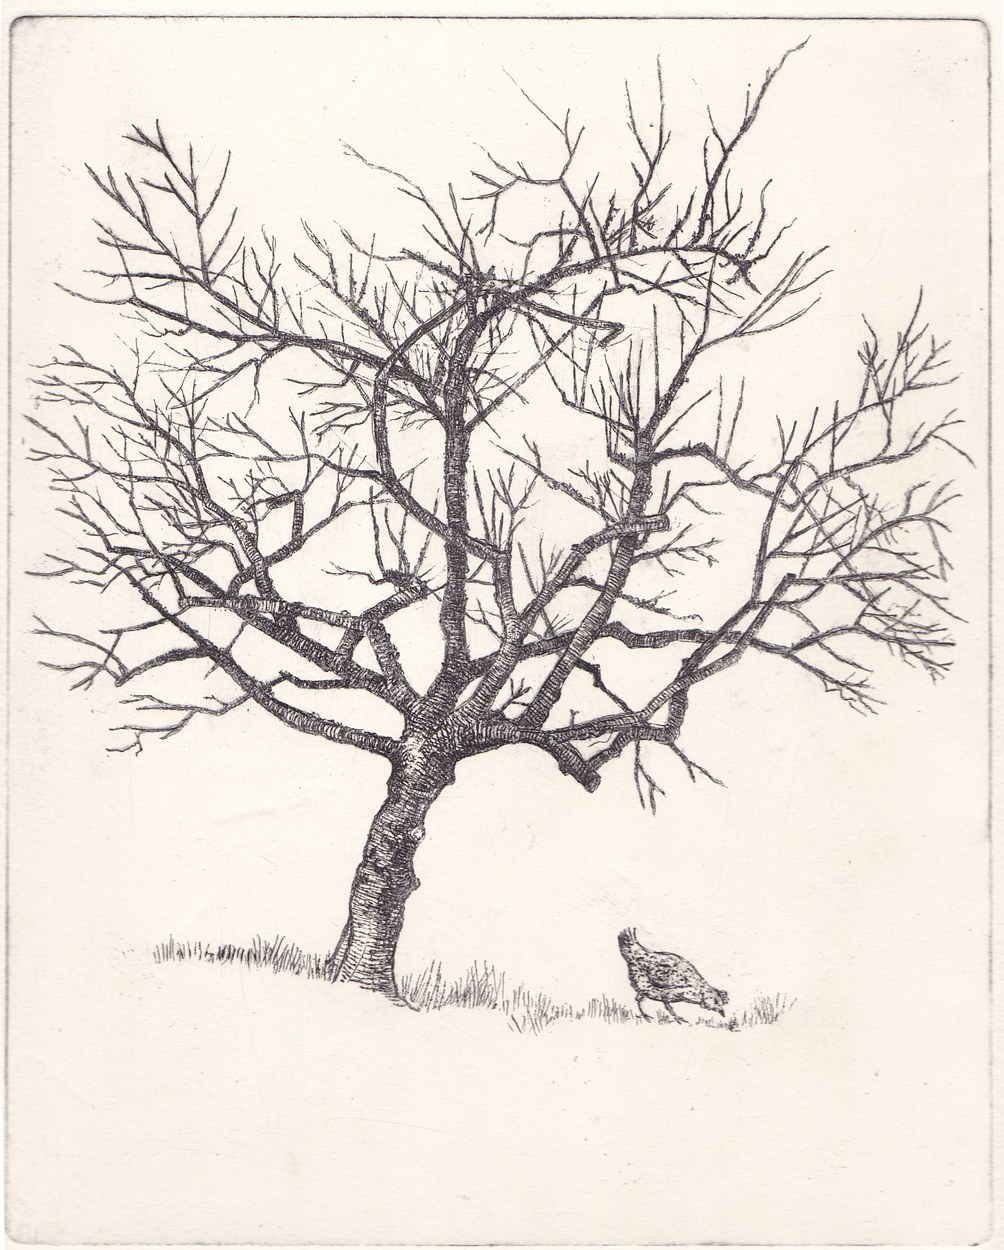 Tree and Chicken, etching, image size 20 x 25 cm., edition of 30, £150